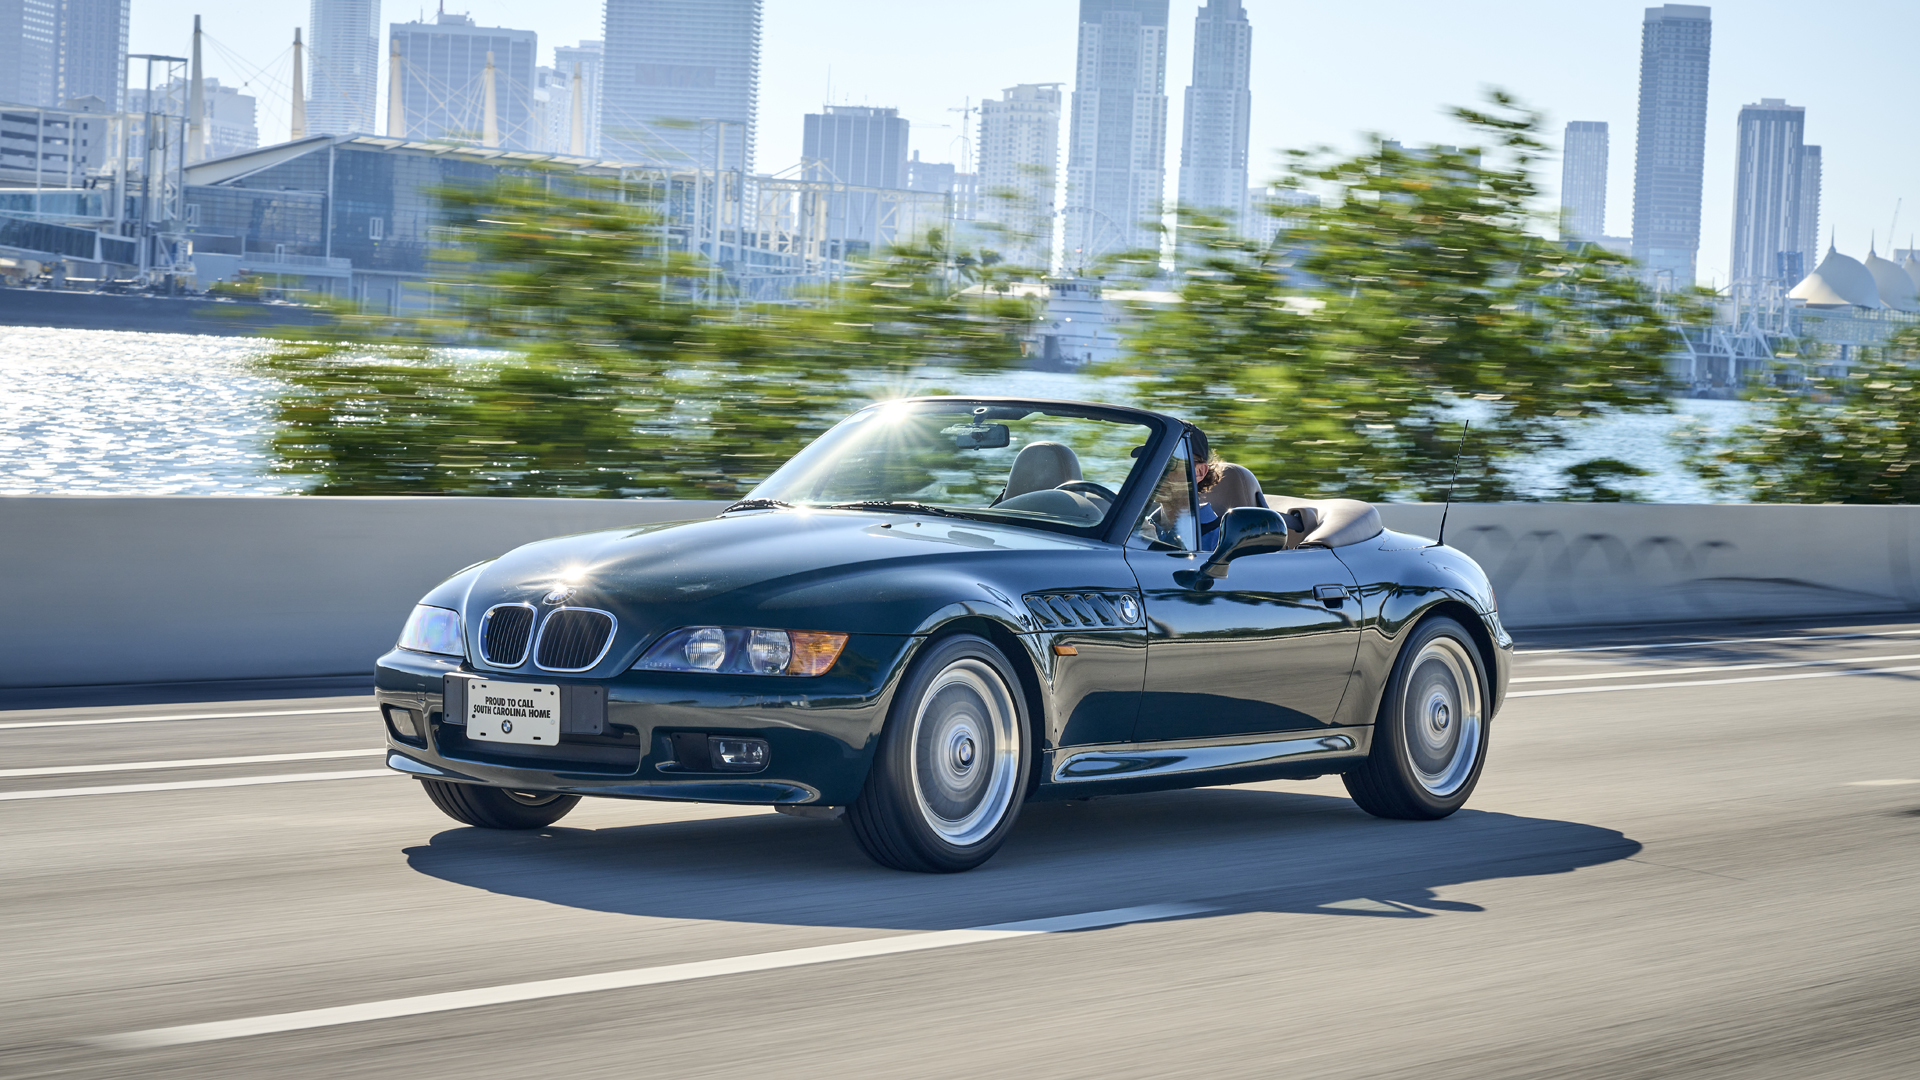 BMW Z3 Convertible: Models, Generations and Details